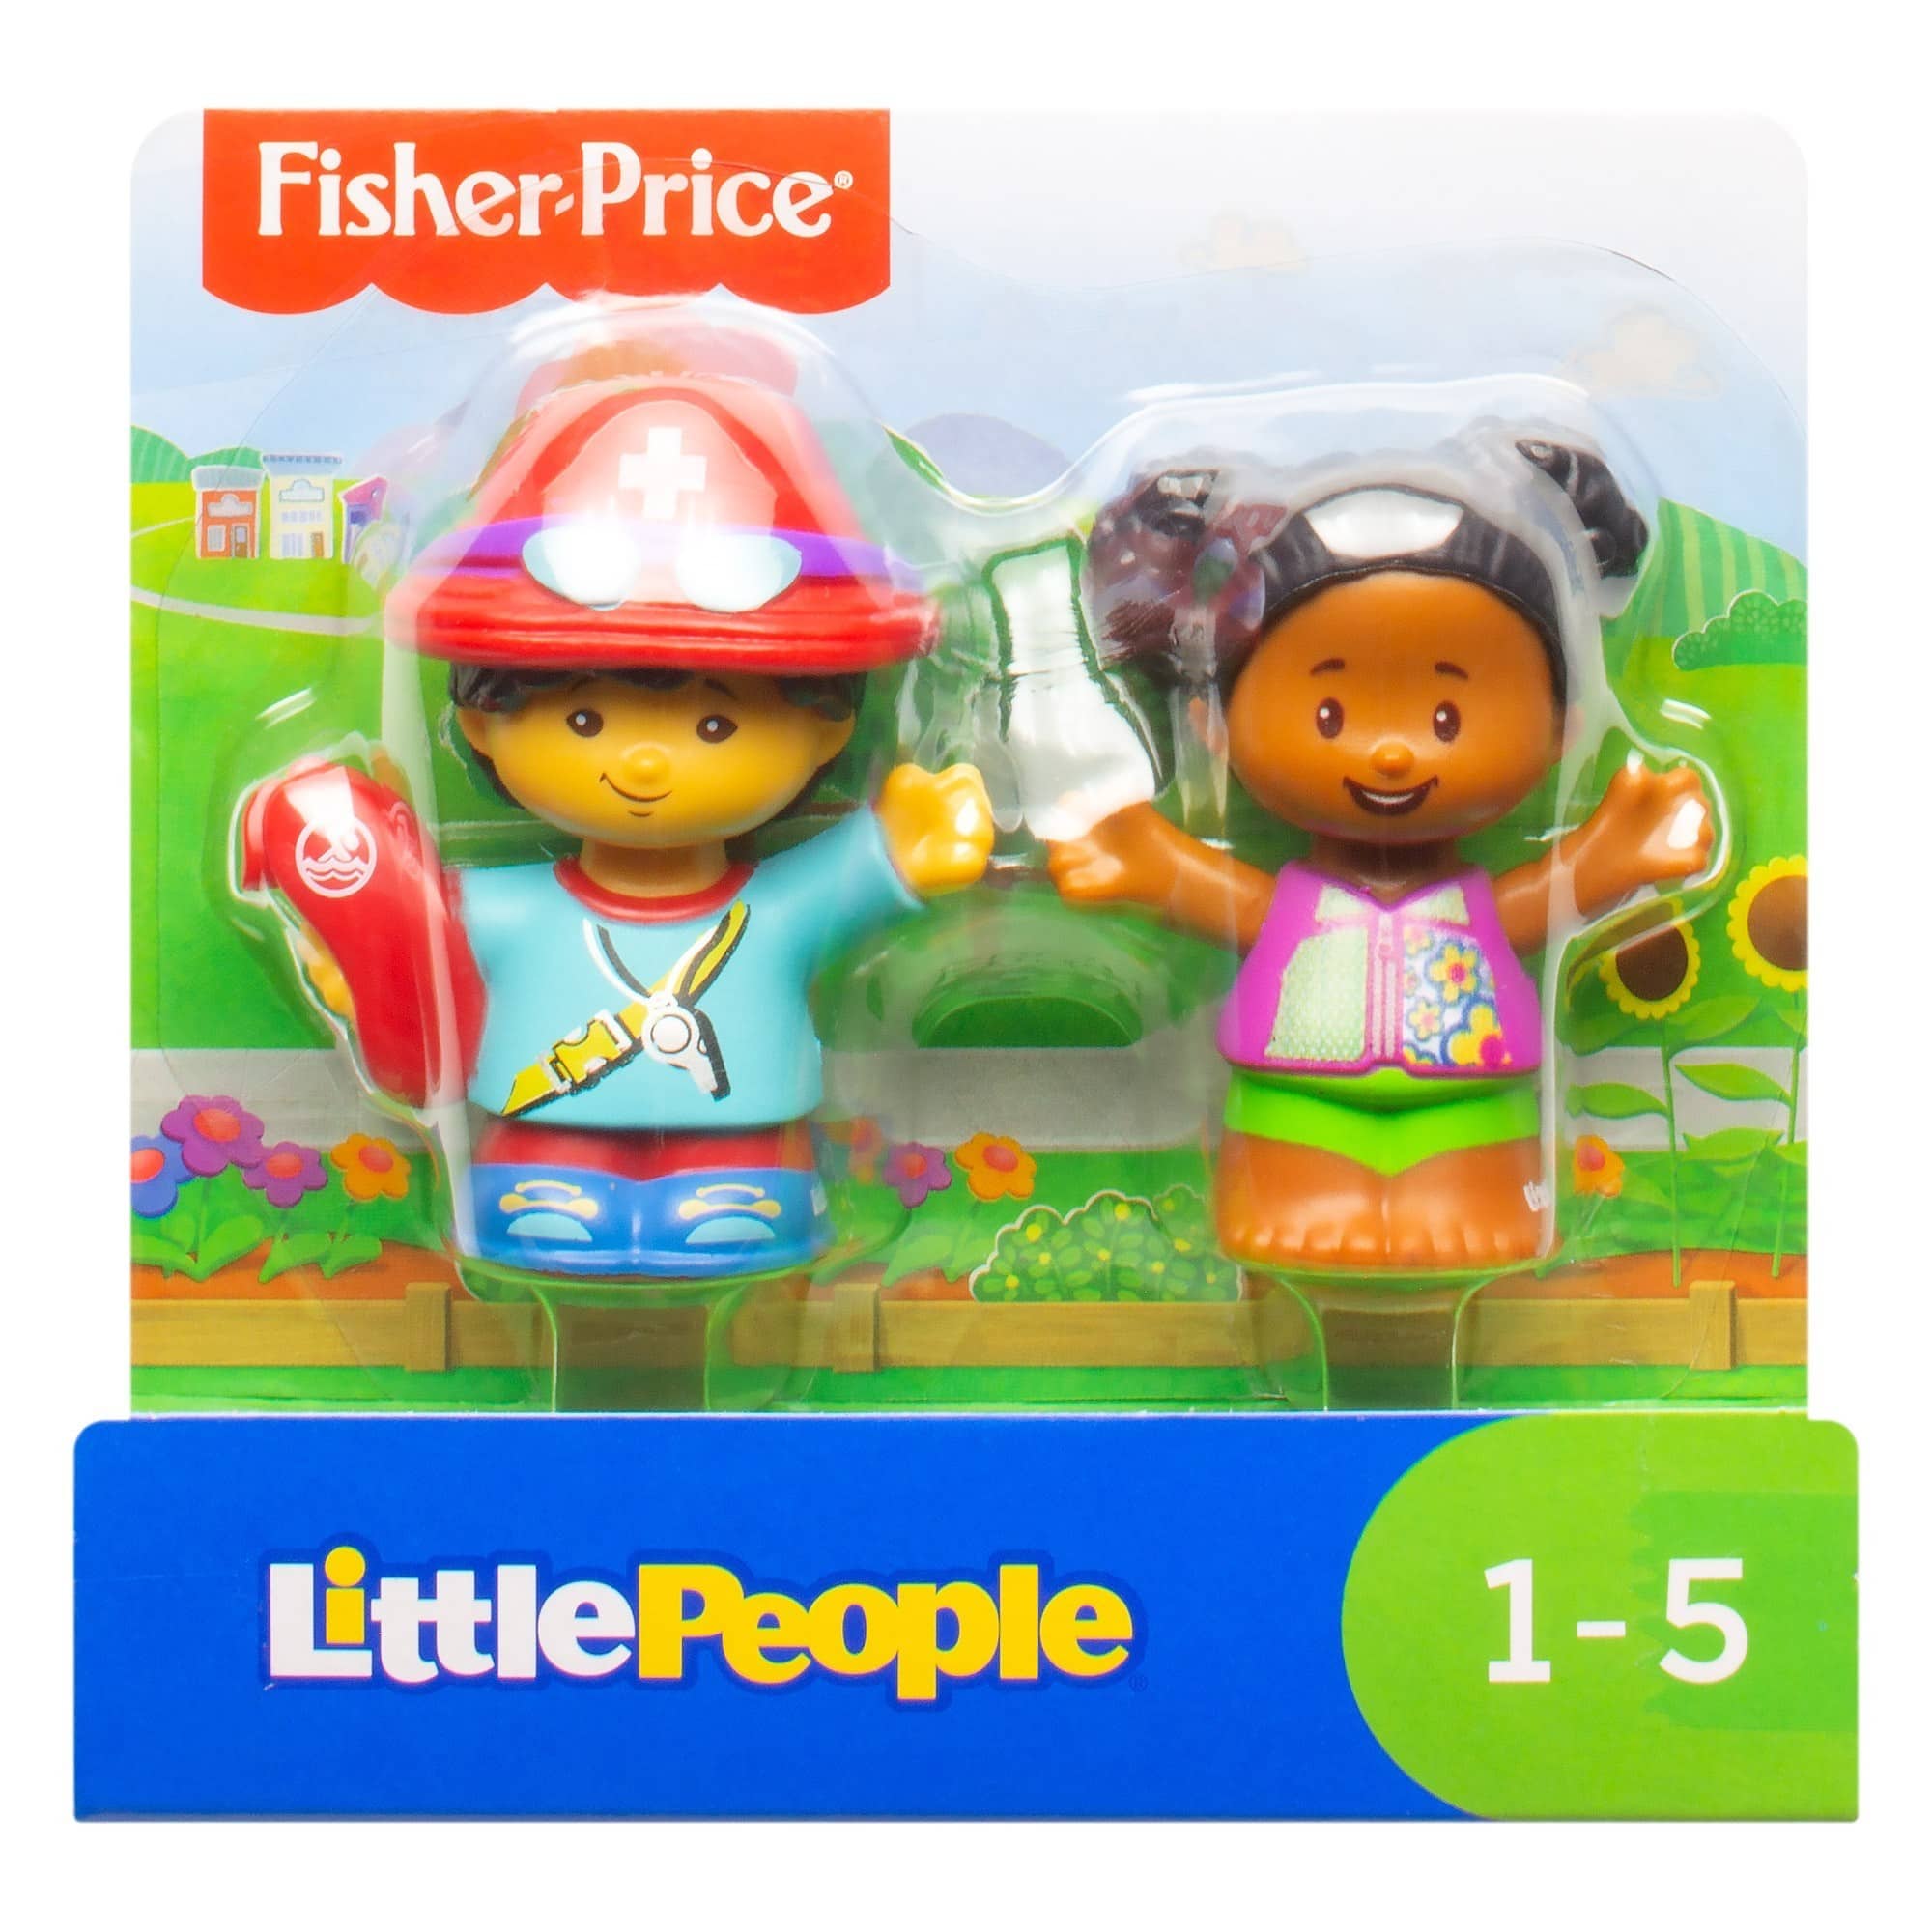 Fisher Price - Little People Figures - Lifeguard Steven and Tessa